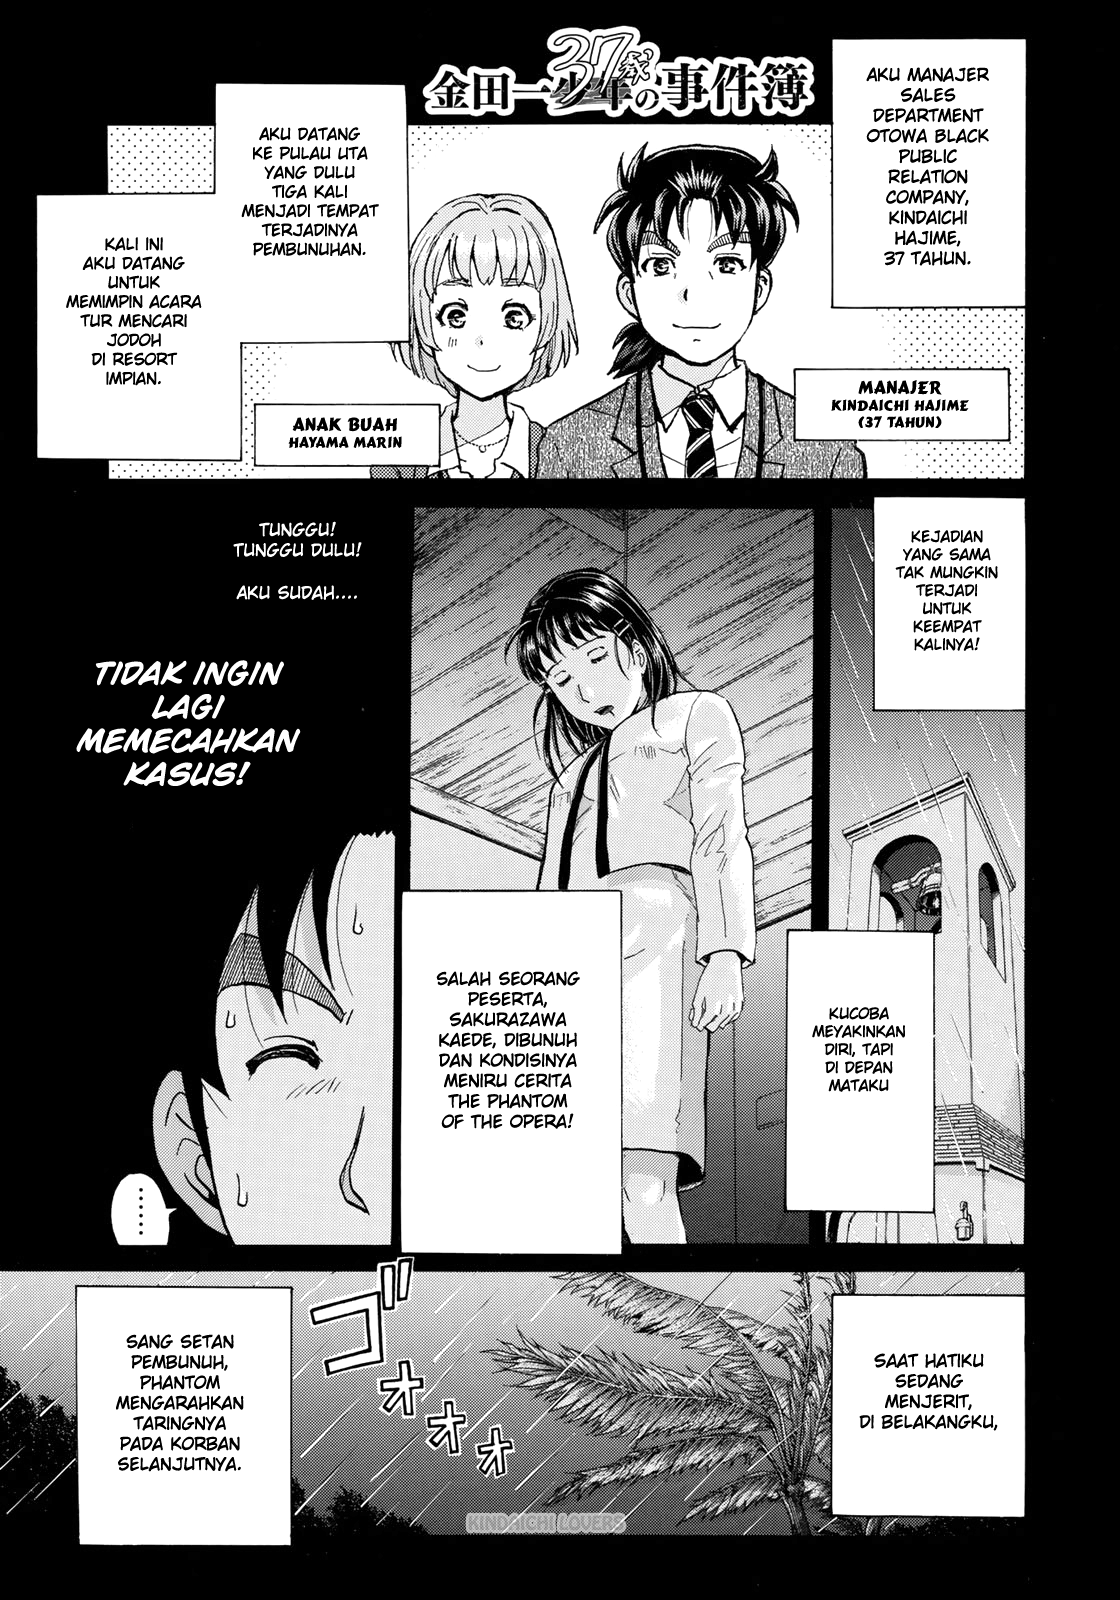 37 Year Old Kindaichi Case Files Chapter 7